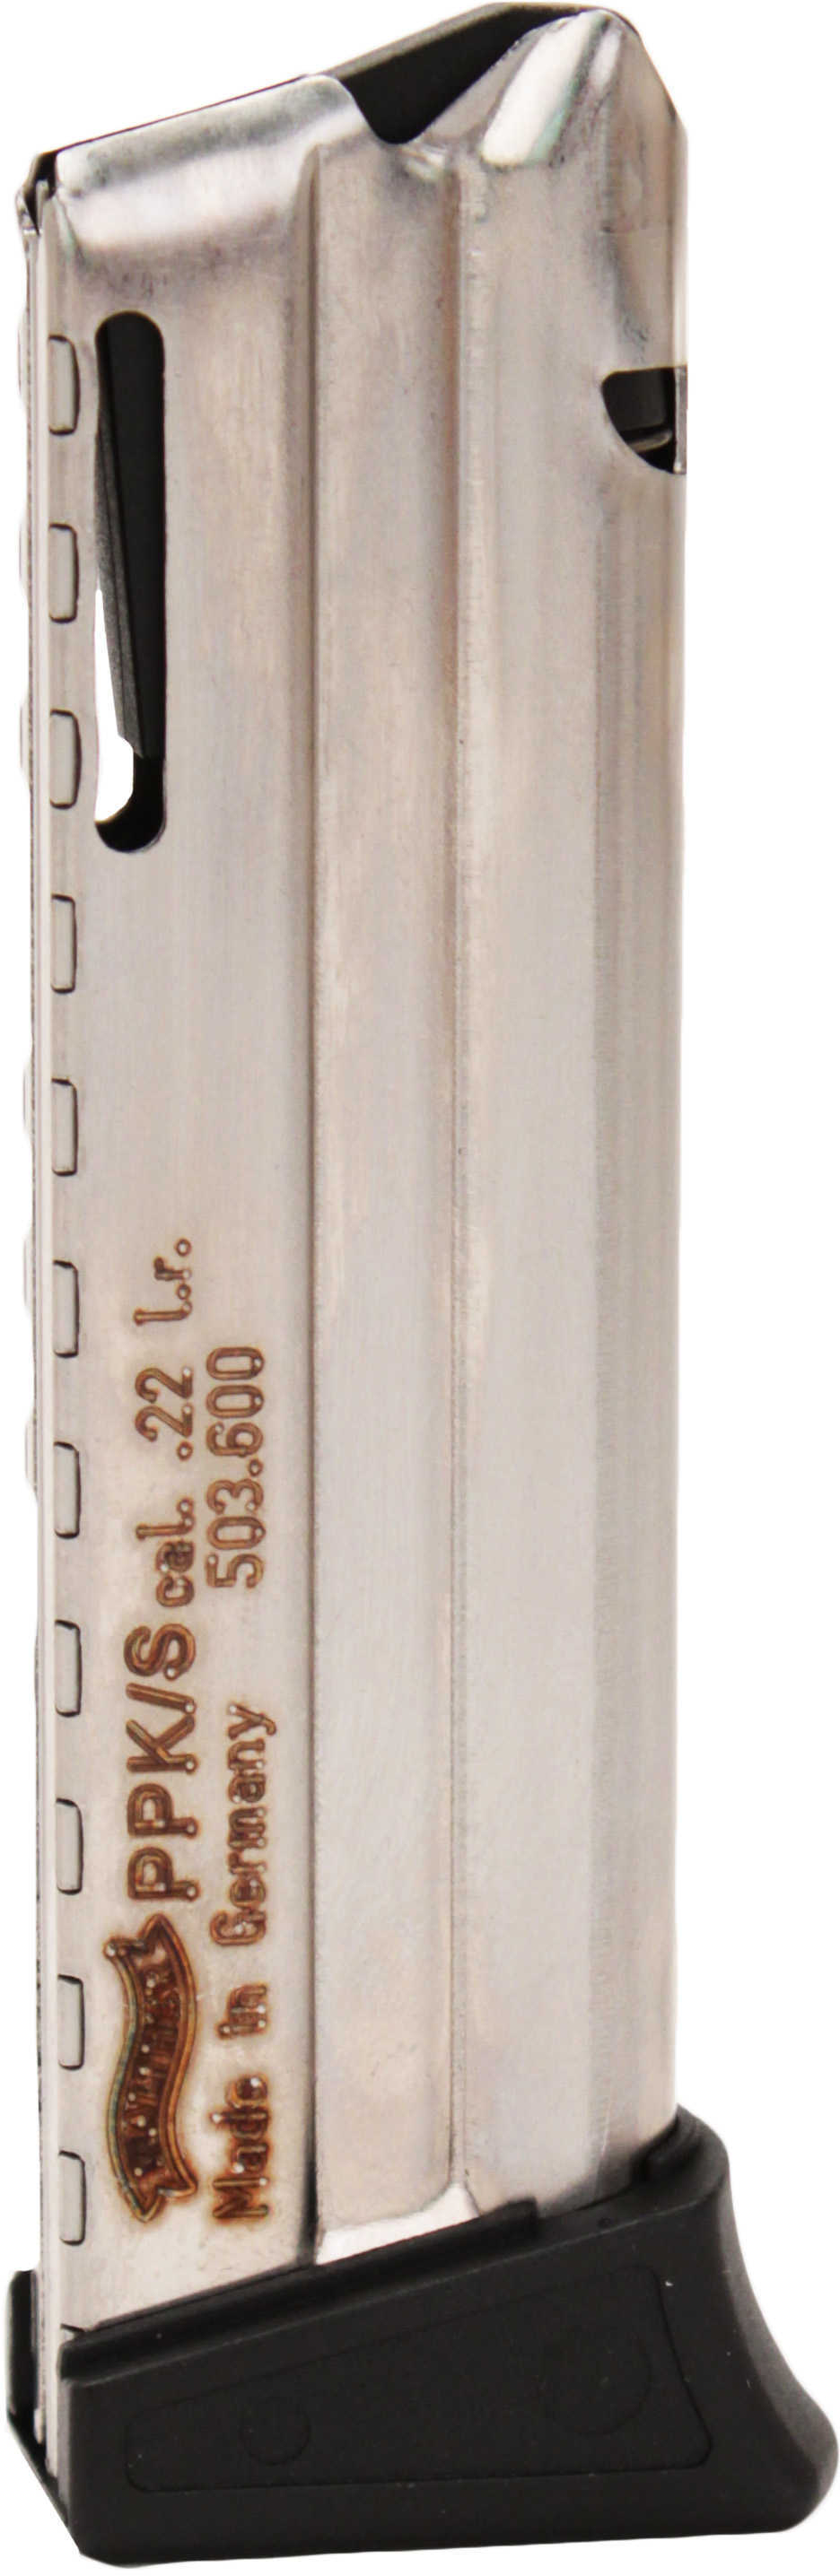 Walther Magazine 22LR 10rd Fits PPK/S Stainless Steel 503-600